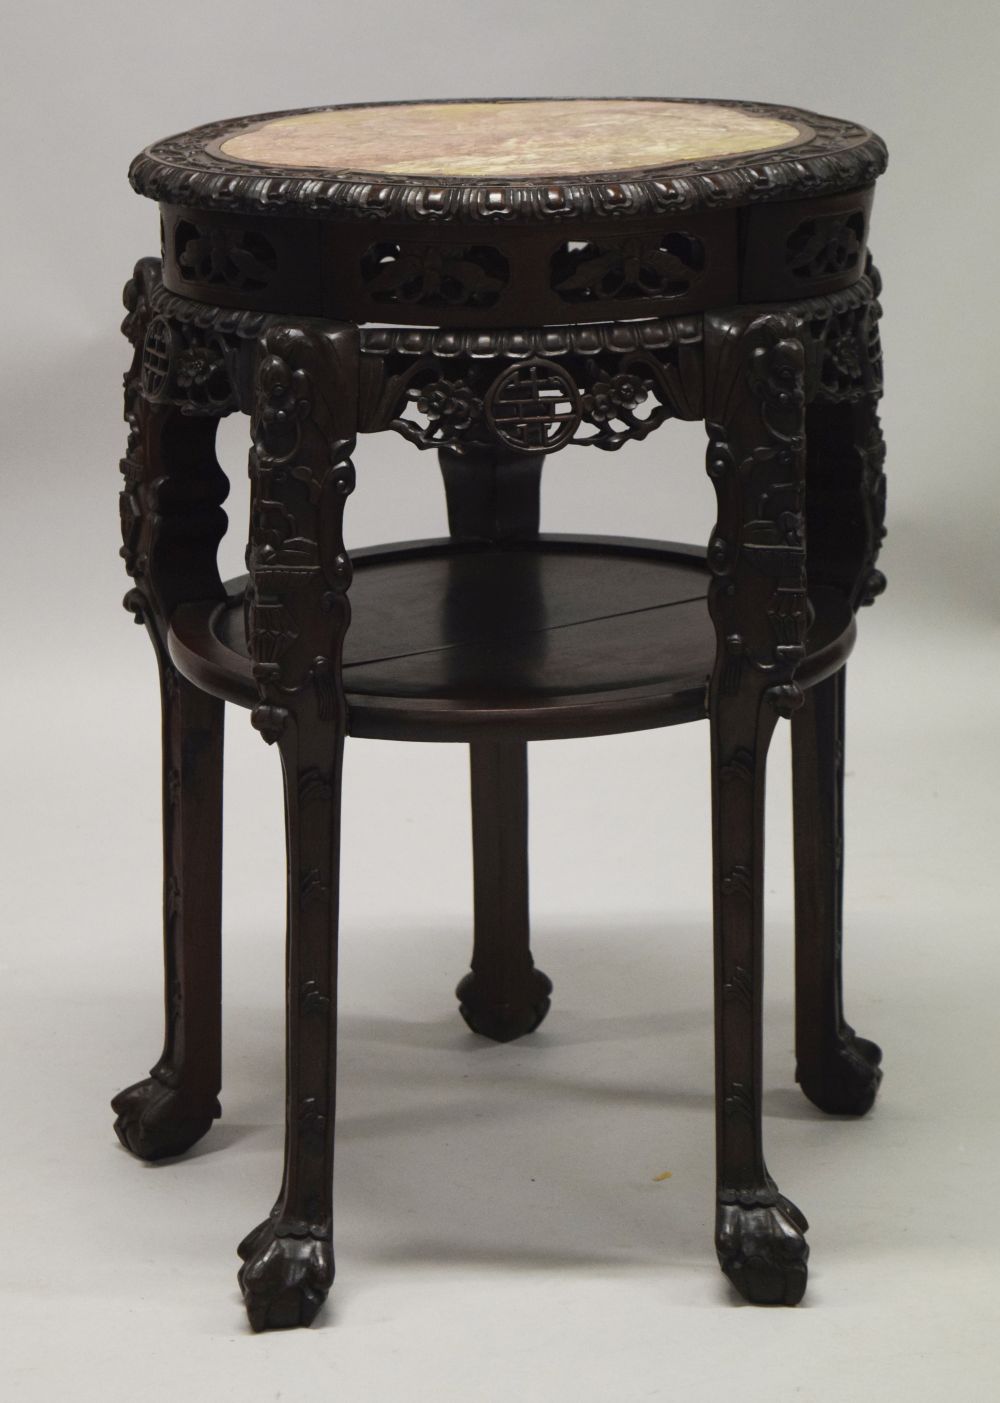 A LARGE AND IMPRESSIVE CHINESE HARDWOOD MARBLE TOP URN STAND, the frieze carved and pierced with